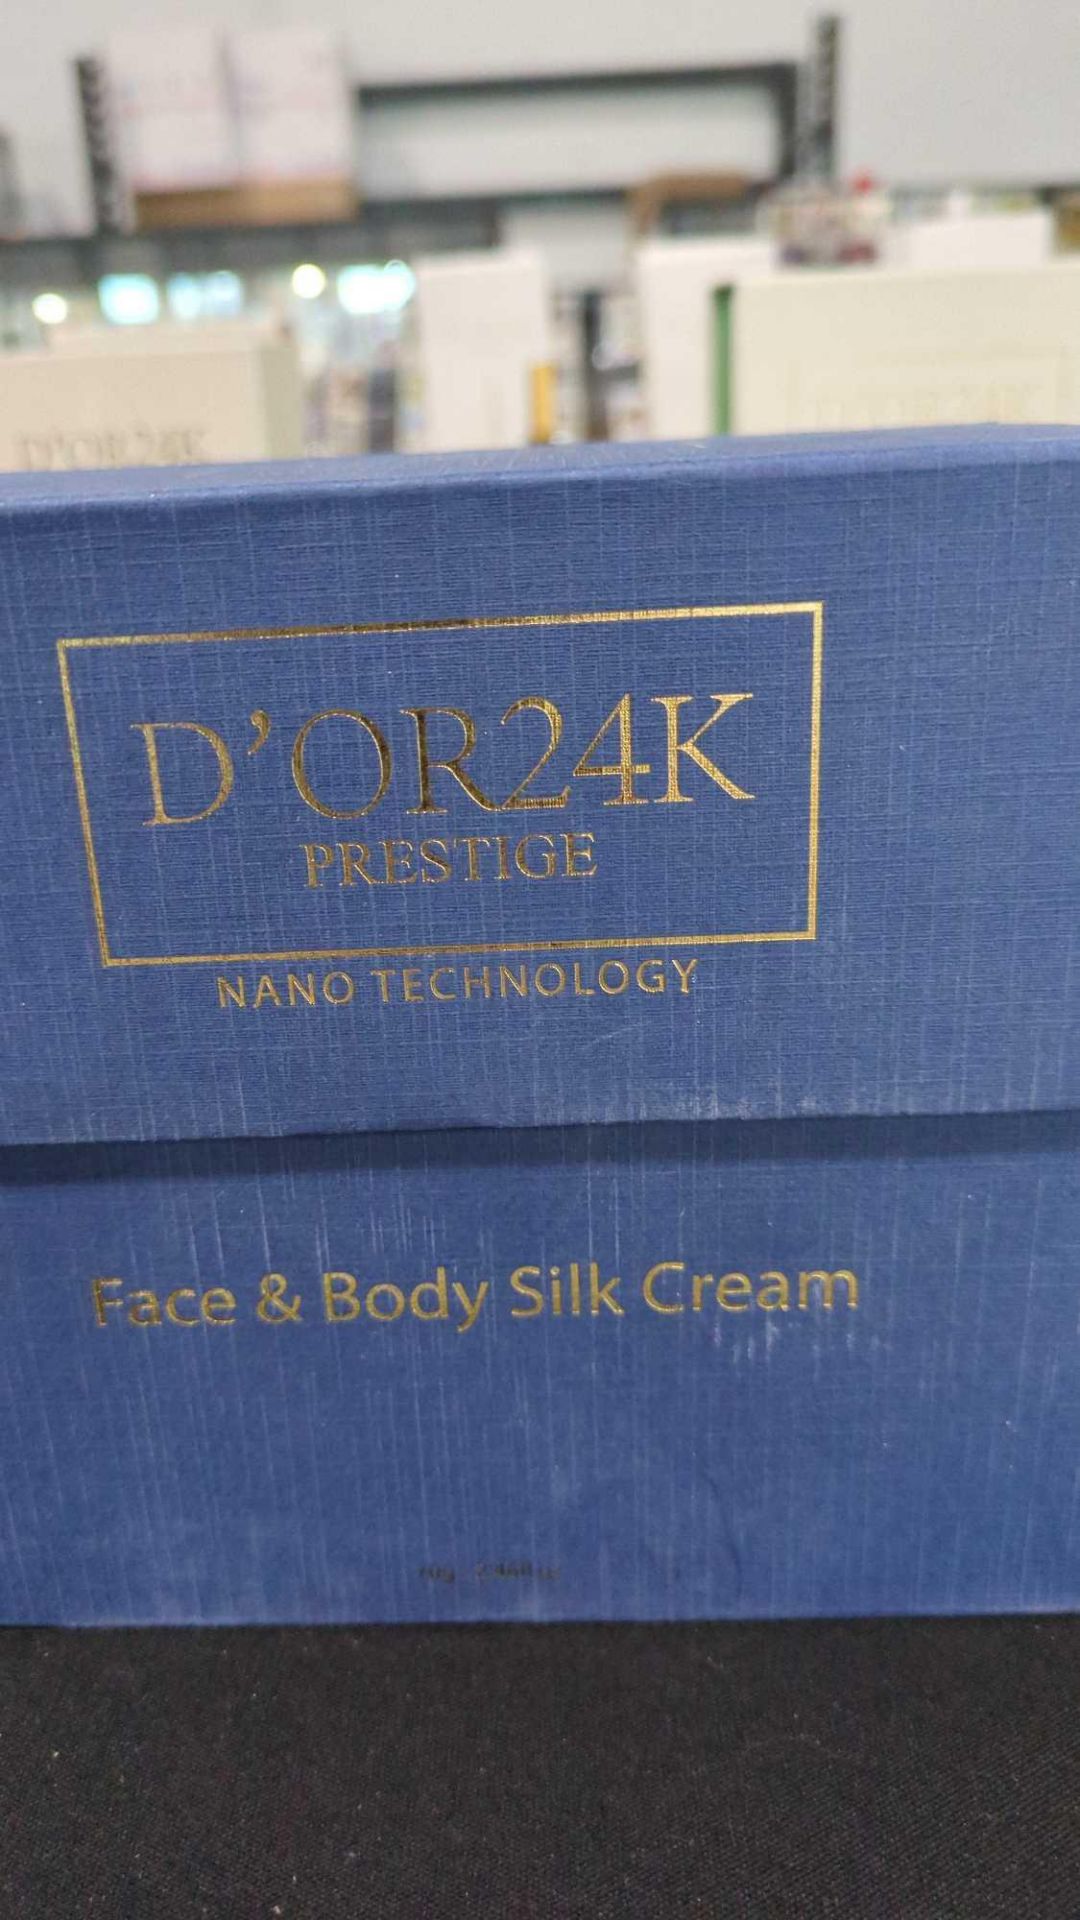 D'or 24K prestige products, opatra products dermolactives thermal X and more - Image 16 of 22